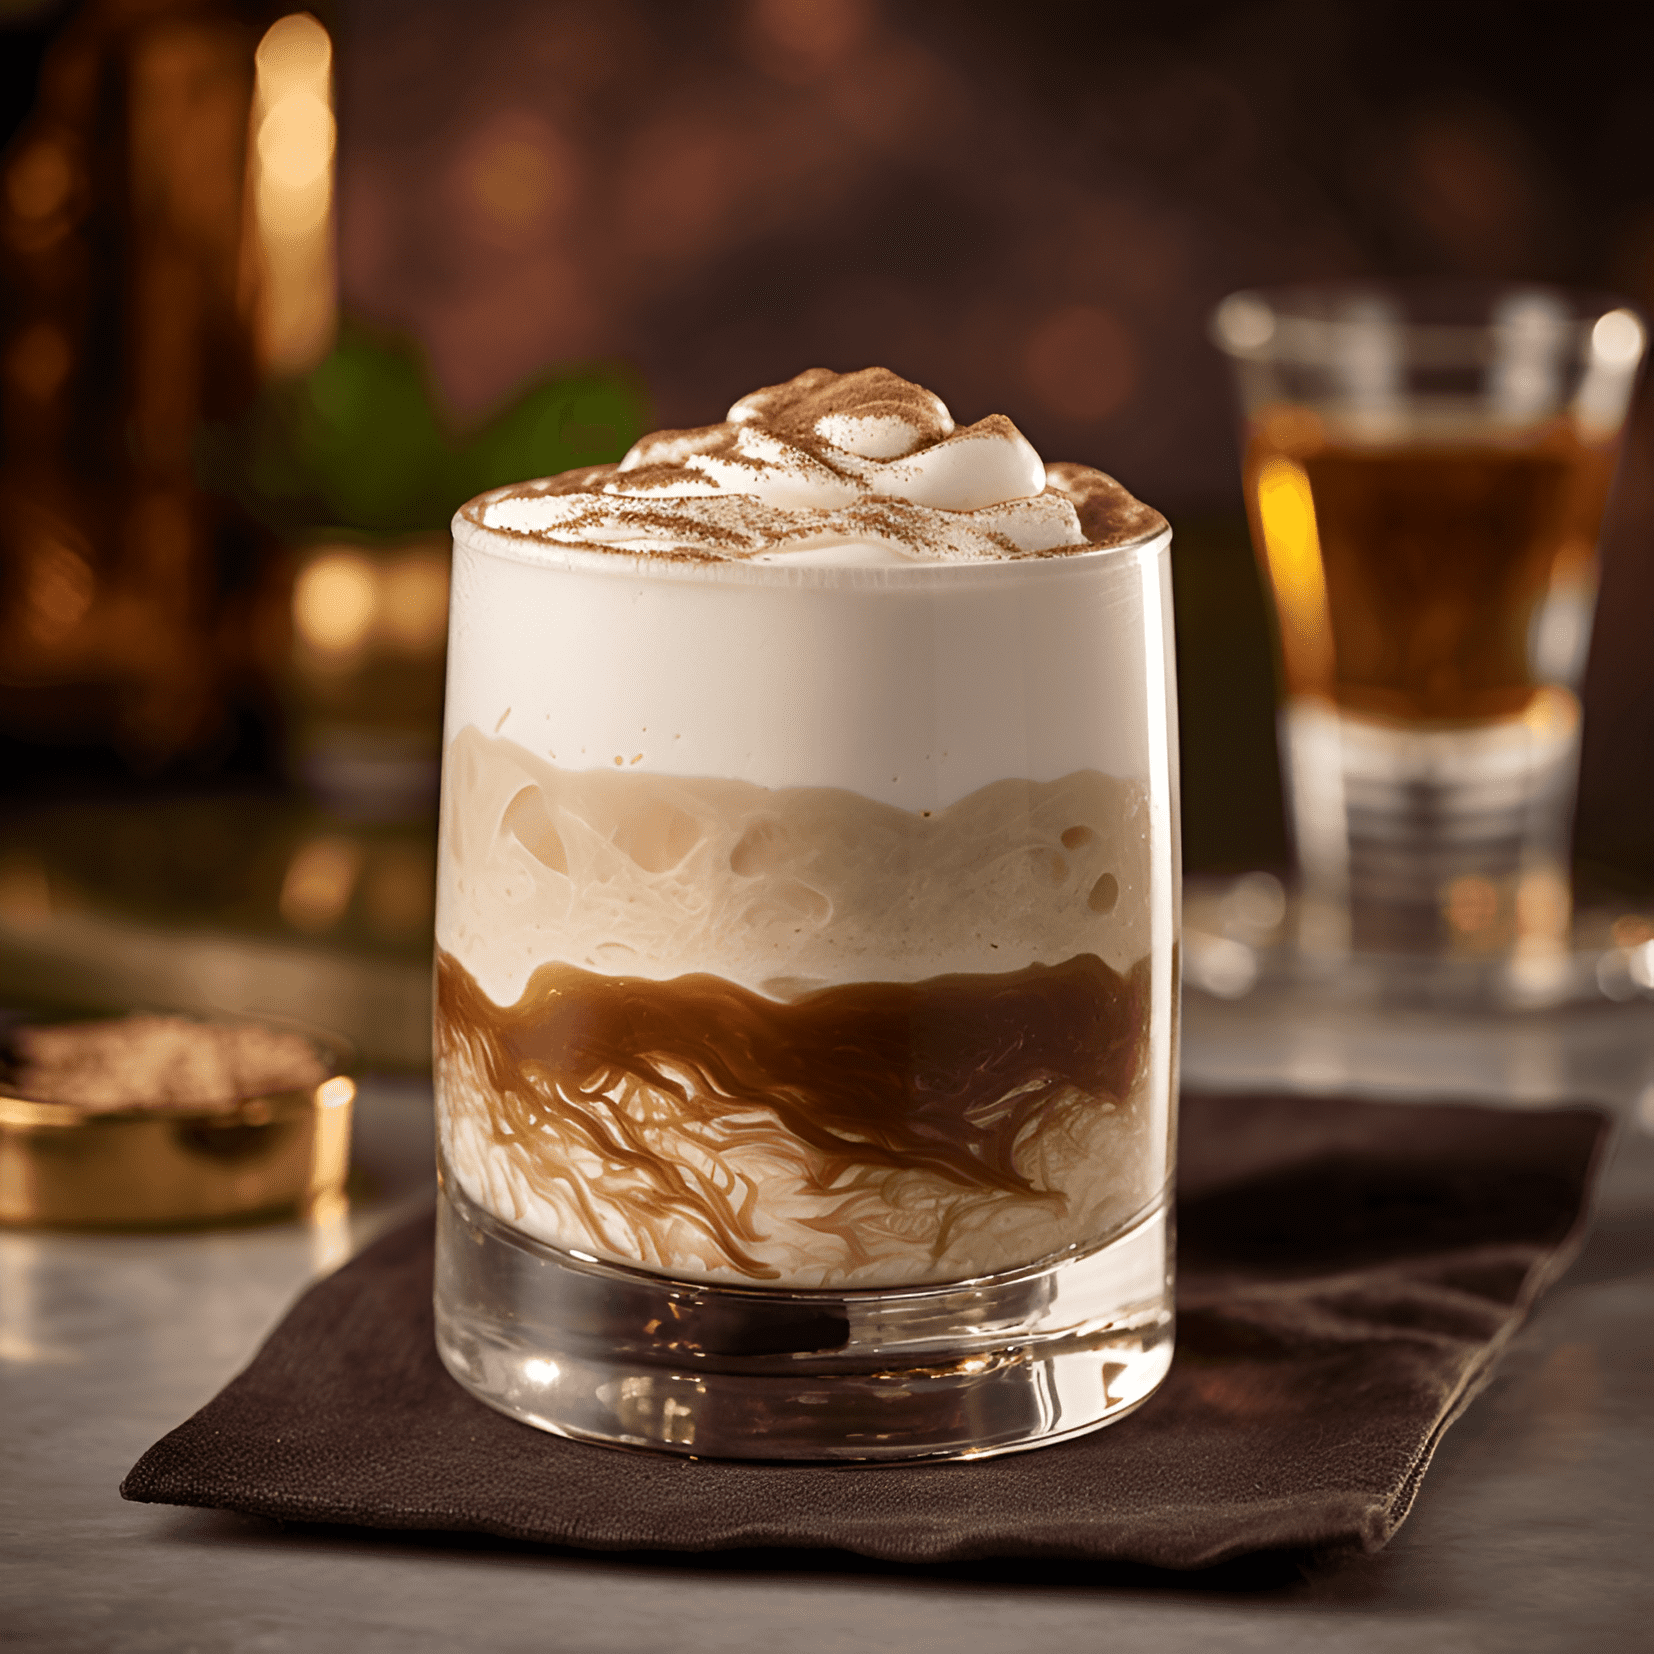 Nutty Irishman Cocktail Recipe - The Nutty Irishman is a creamy, sweet, and rich cocktail with a smooth, velvety texture. The combination of Irish cream and hazelnut liqueur creates a delightful nutty flavor, while the whipped cream adds a luxurious, indulgent finish.